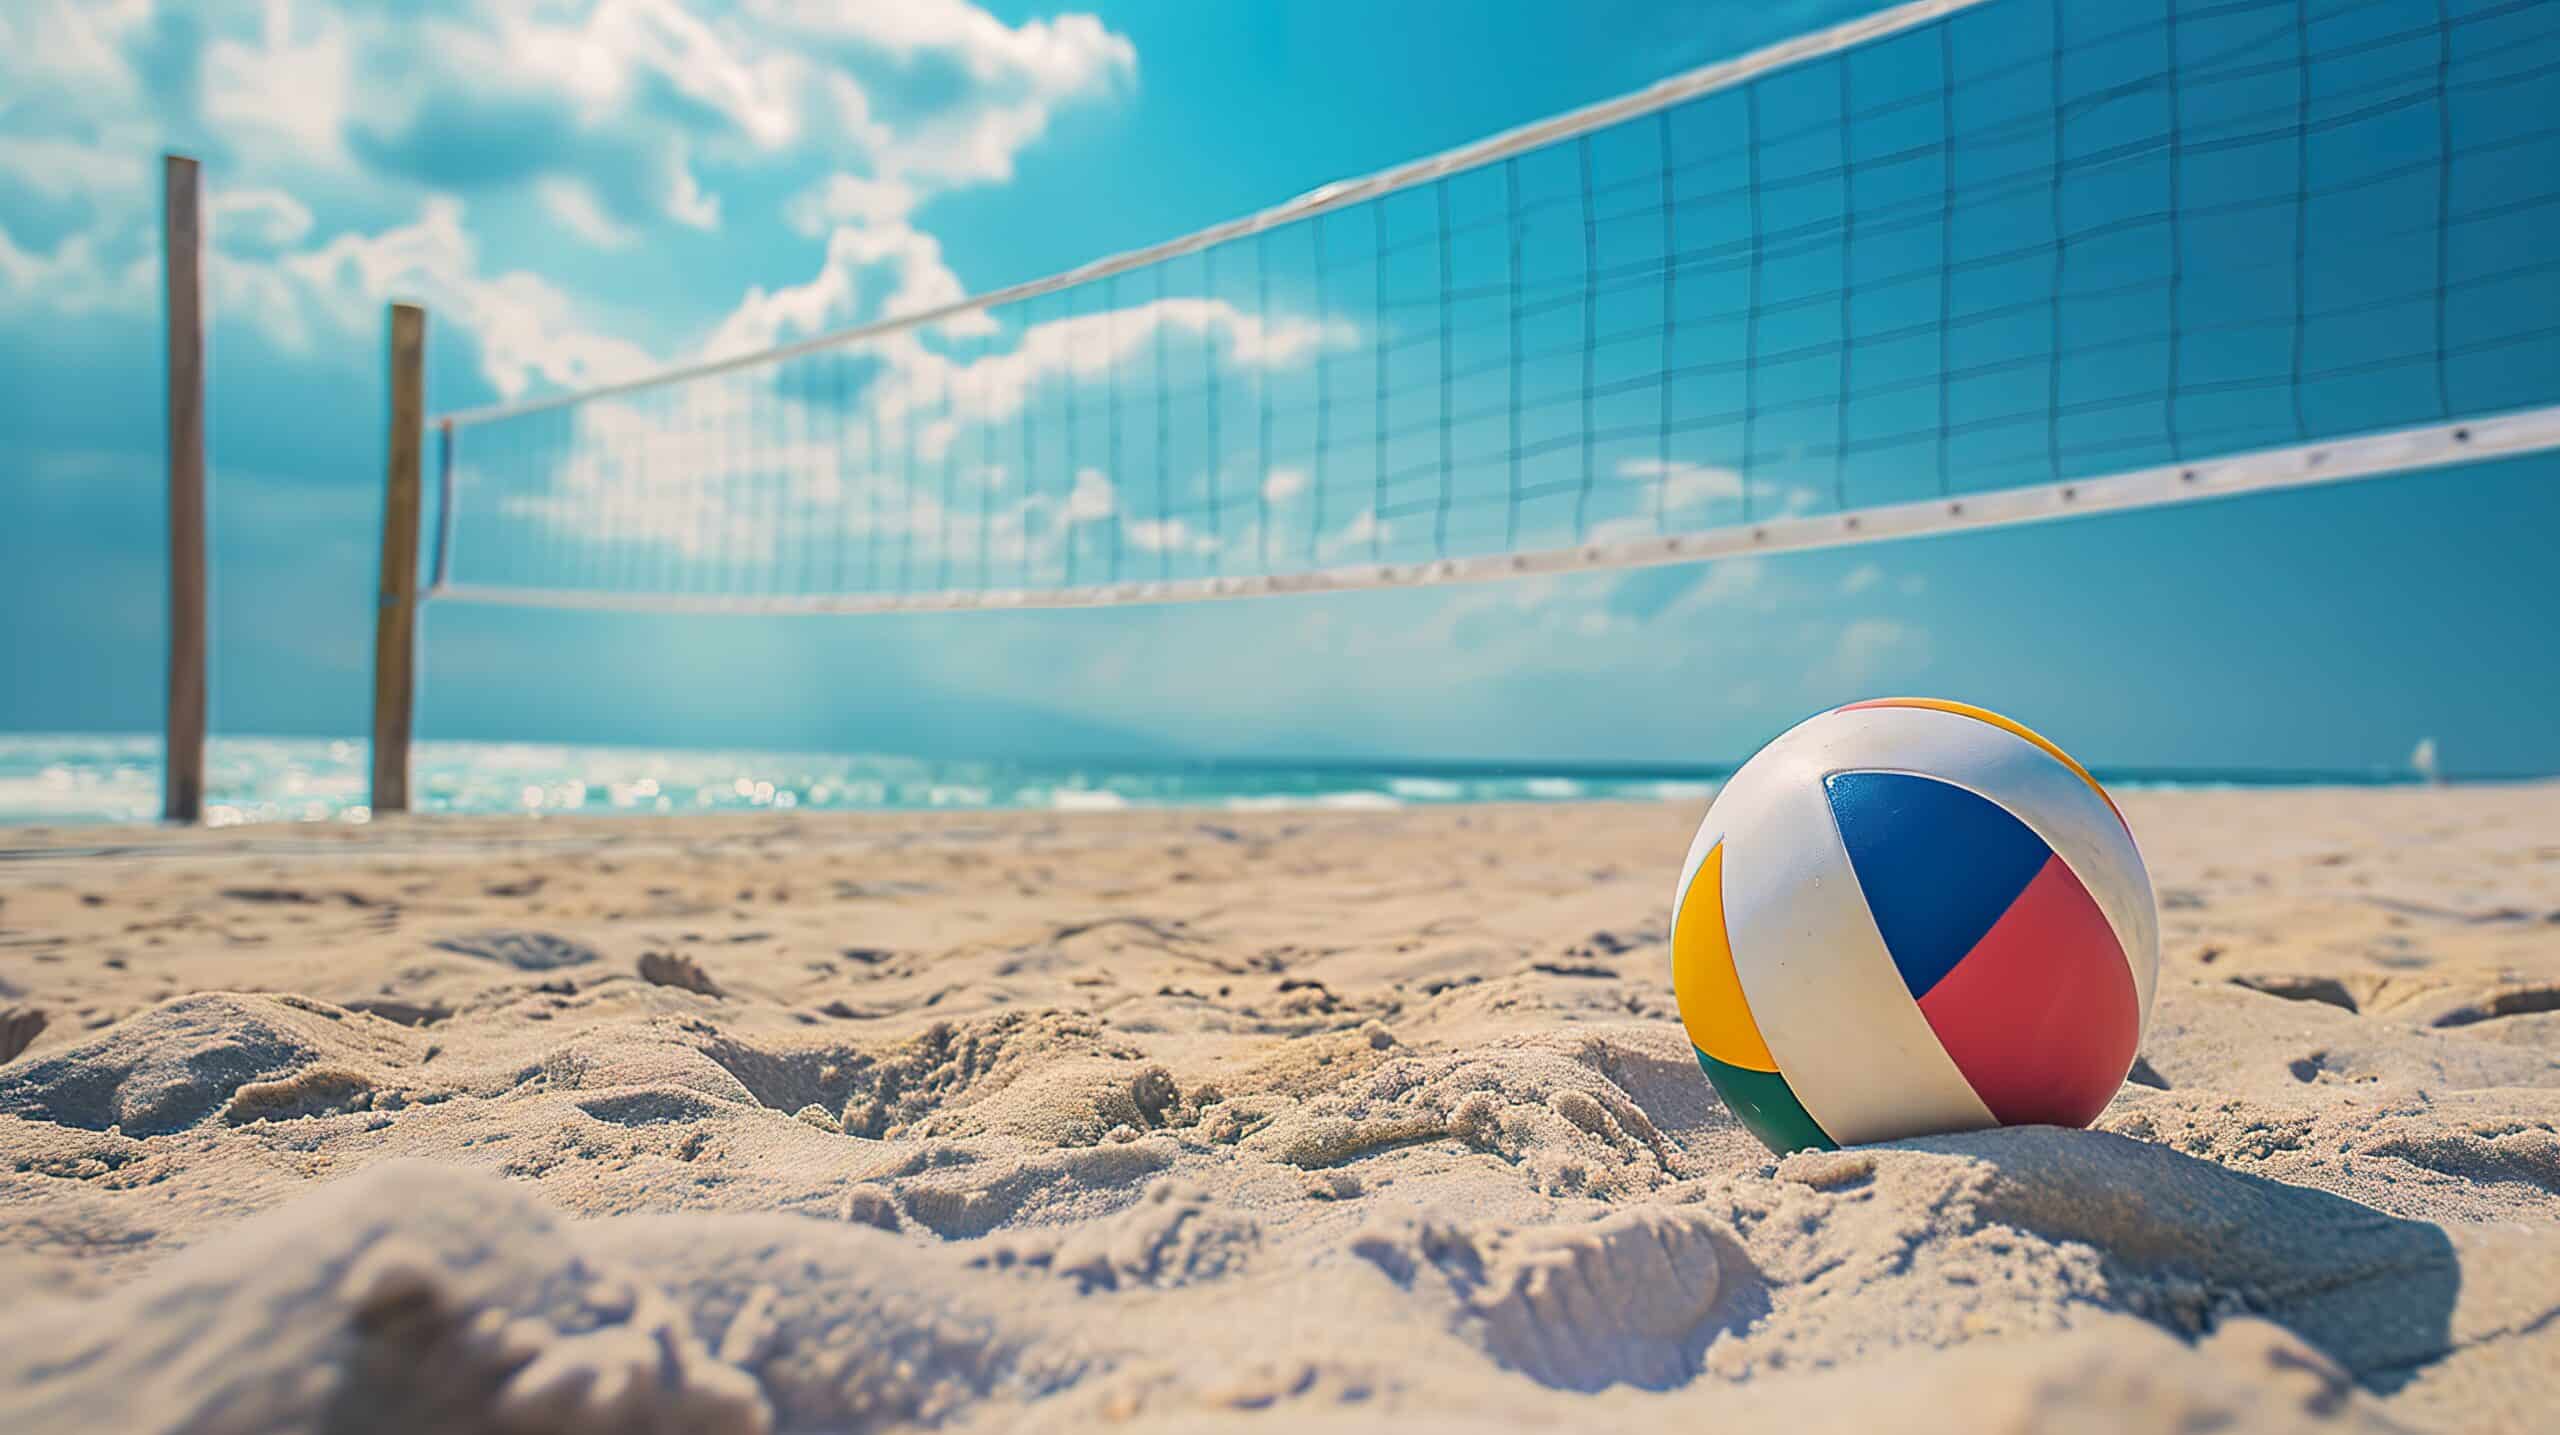 www.appr.com : How do I keep my cat out of the sand volleyball court?